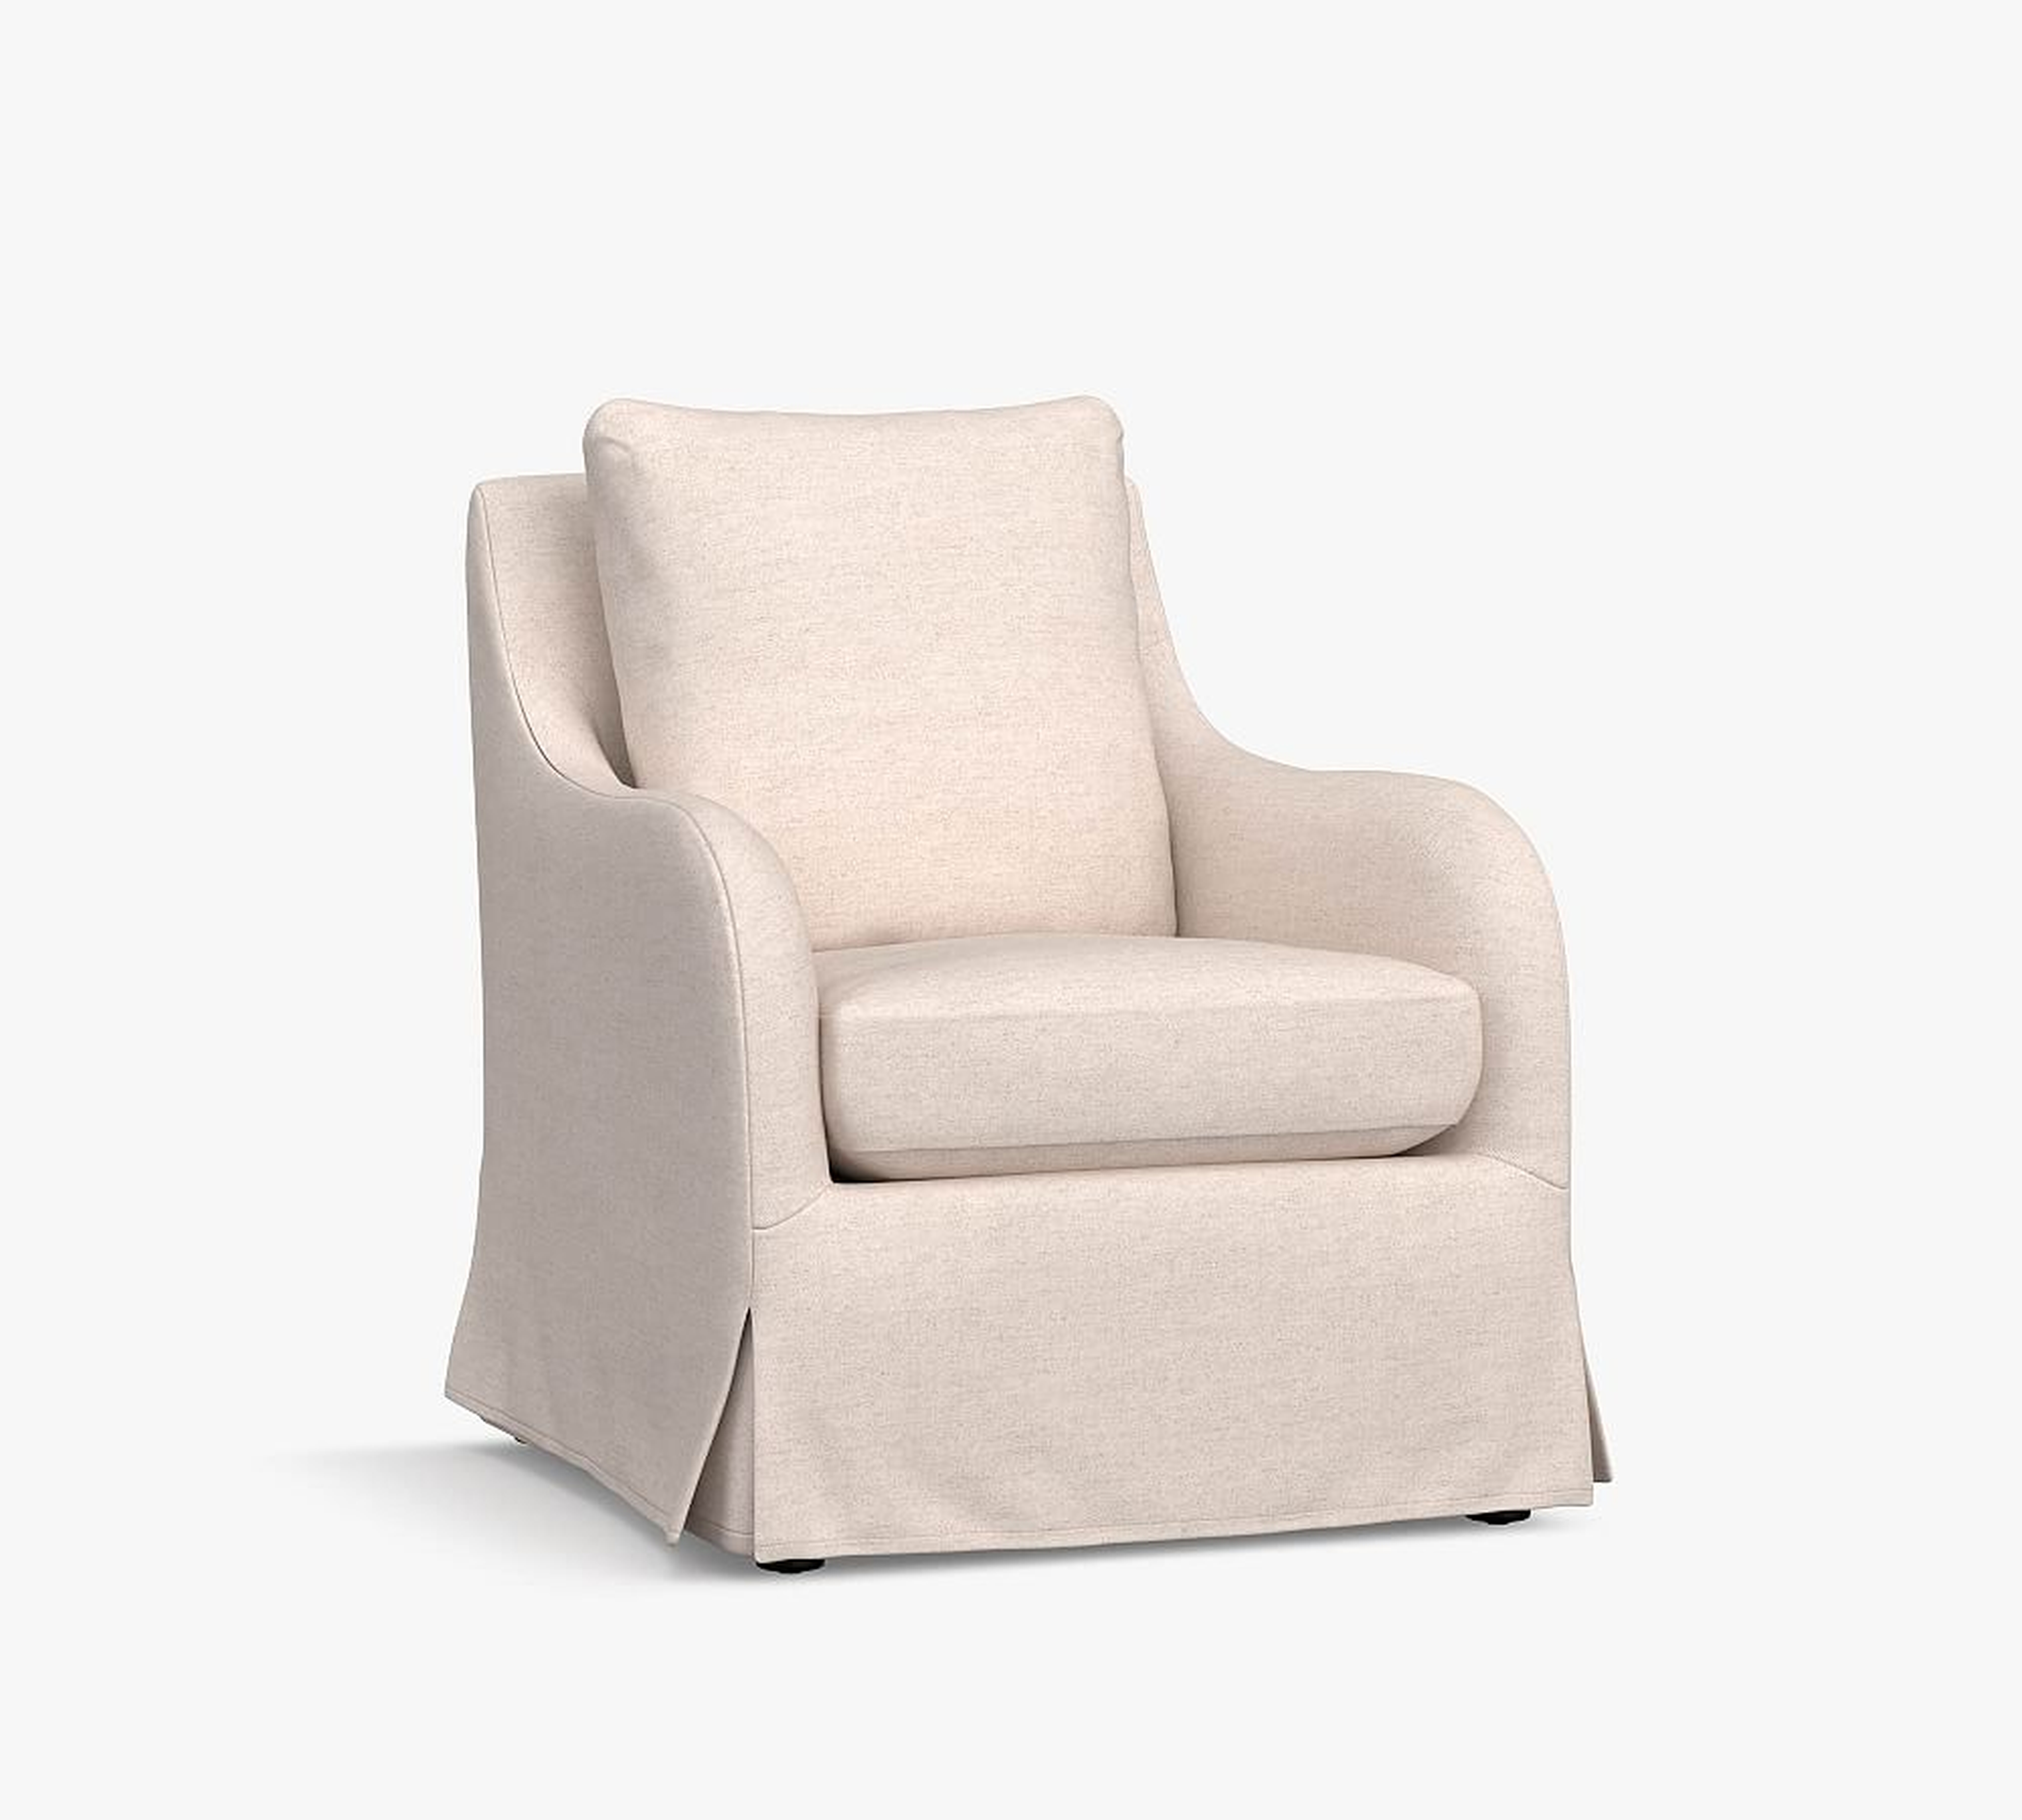 Kelsey Slipcovered Swivel Armchair, Polyester Wrapped Cushions, Performance Boucle Oatmeal - Pottery Barn